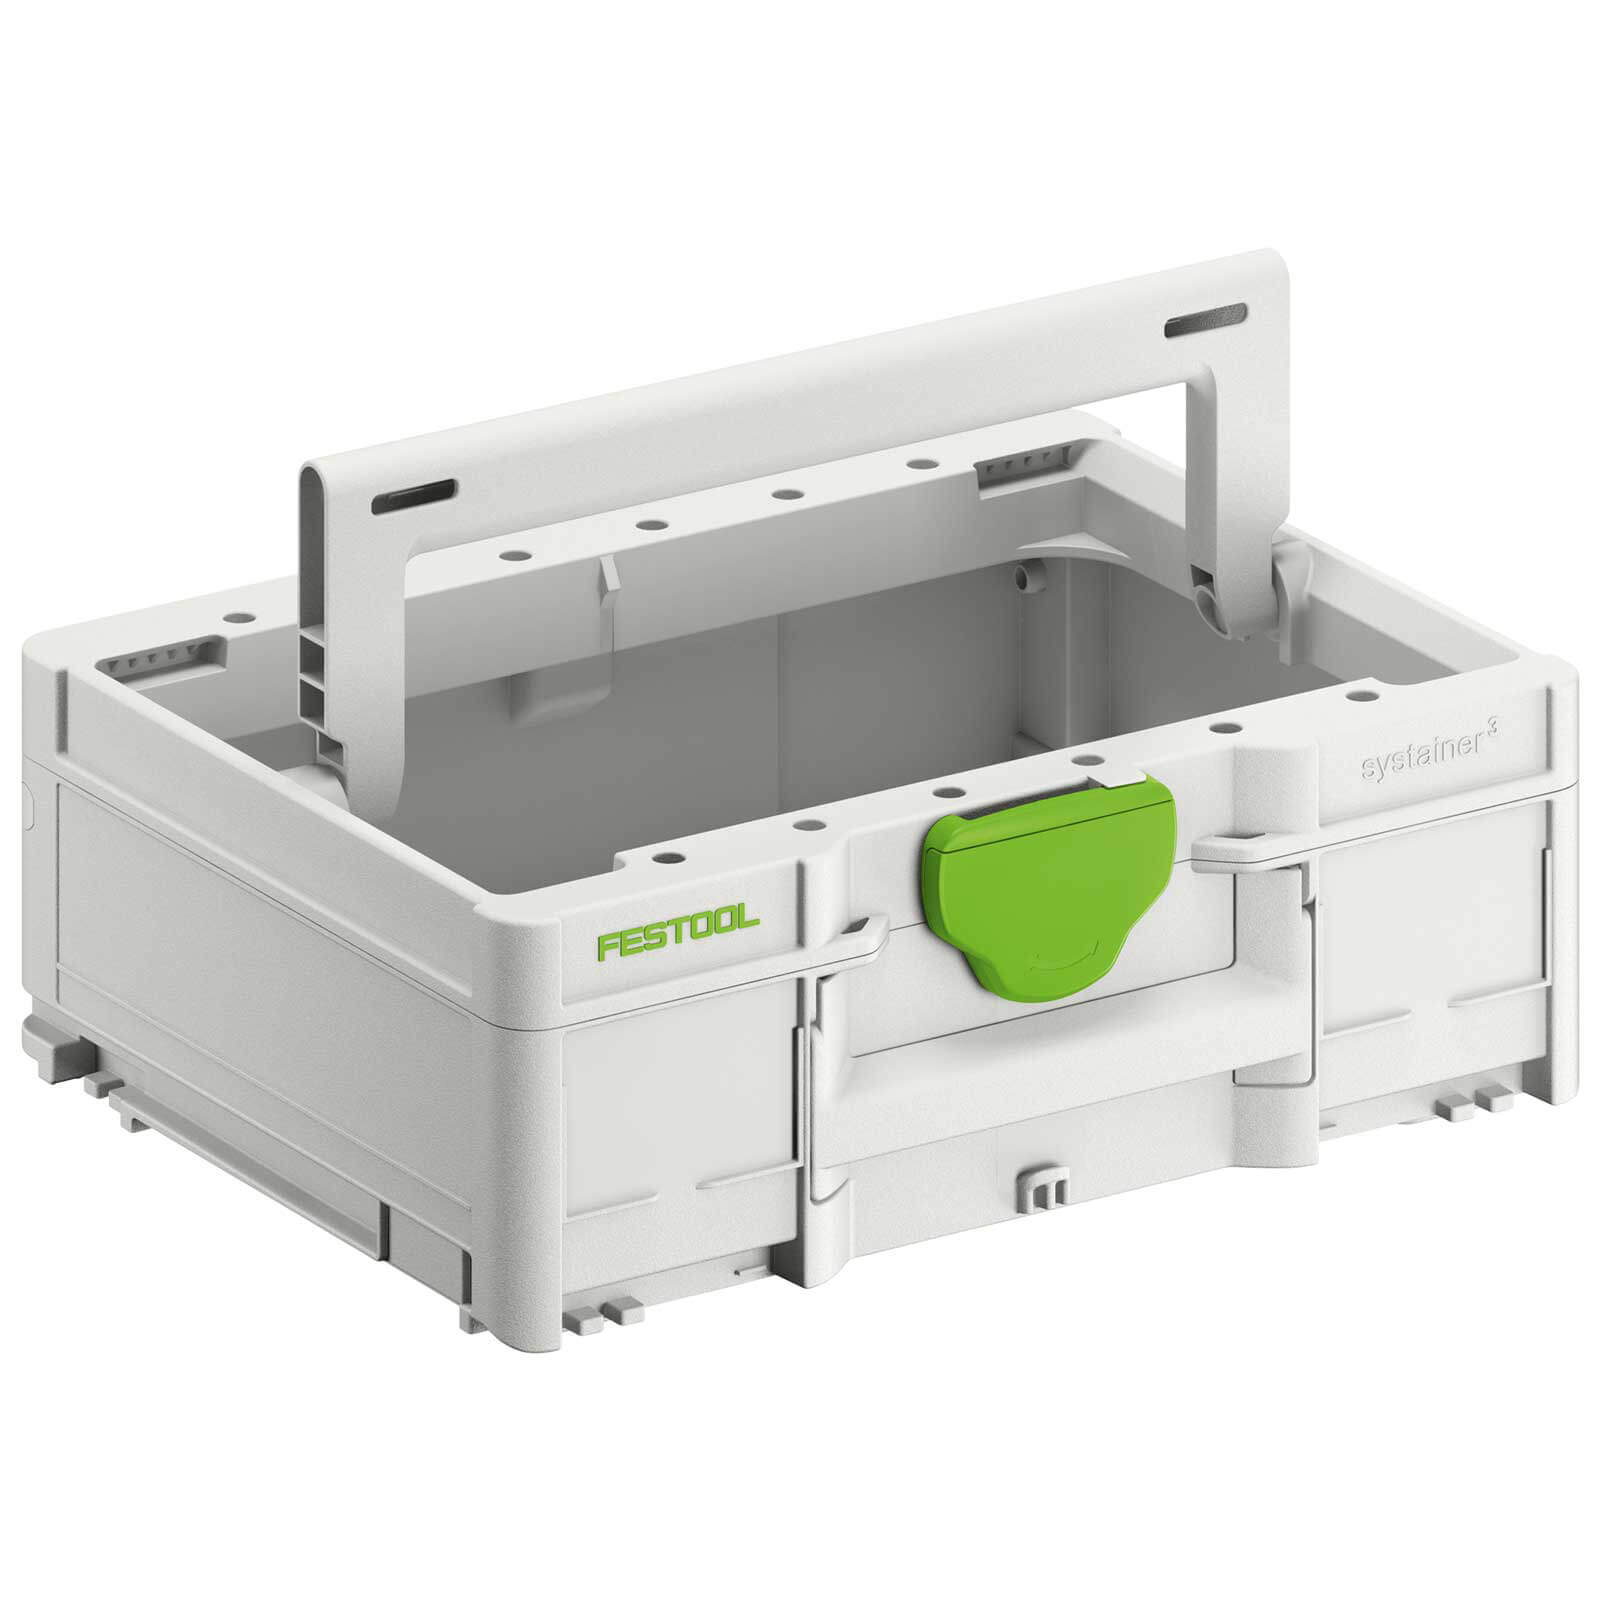 Photos - Tool Box Festool Systainer 3 ToolBox SYS3 TB Medium Tool Case 396mm 296mm 137mm SYS 